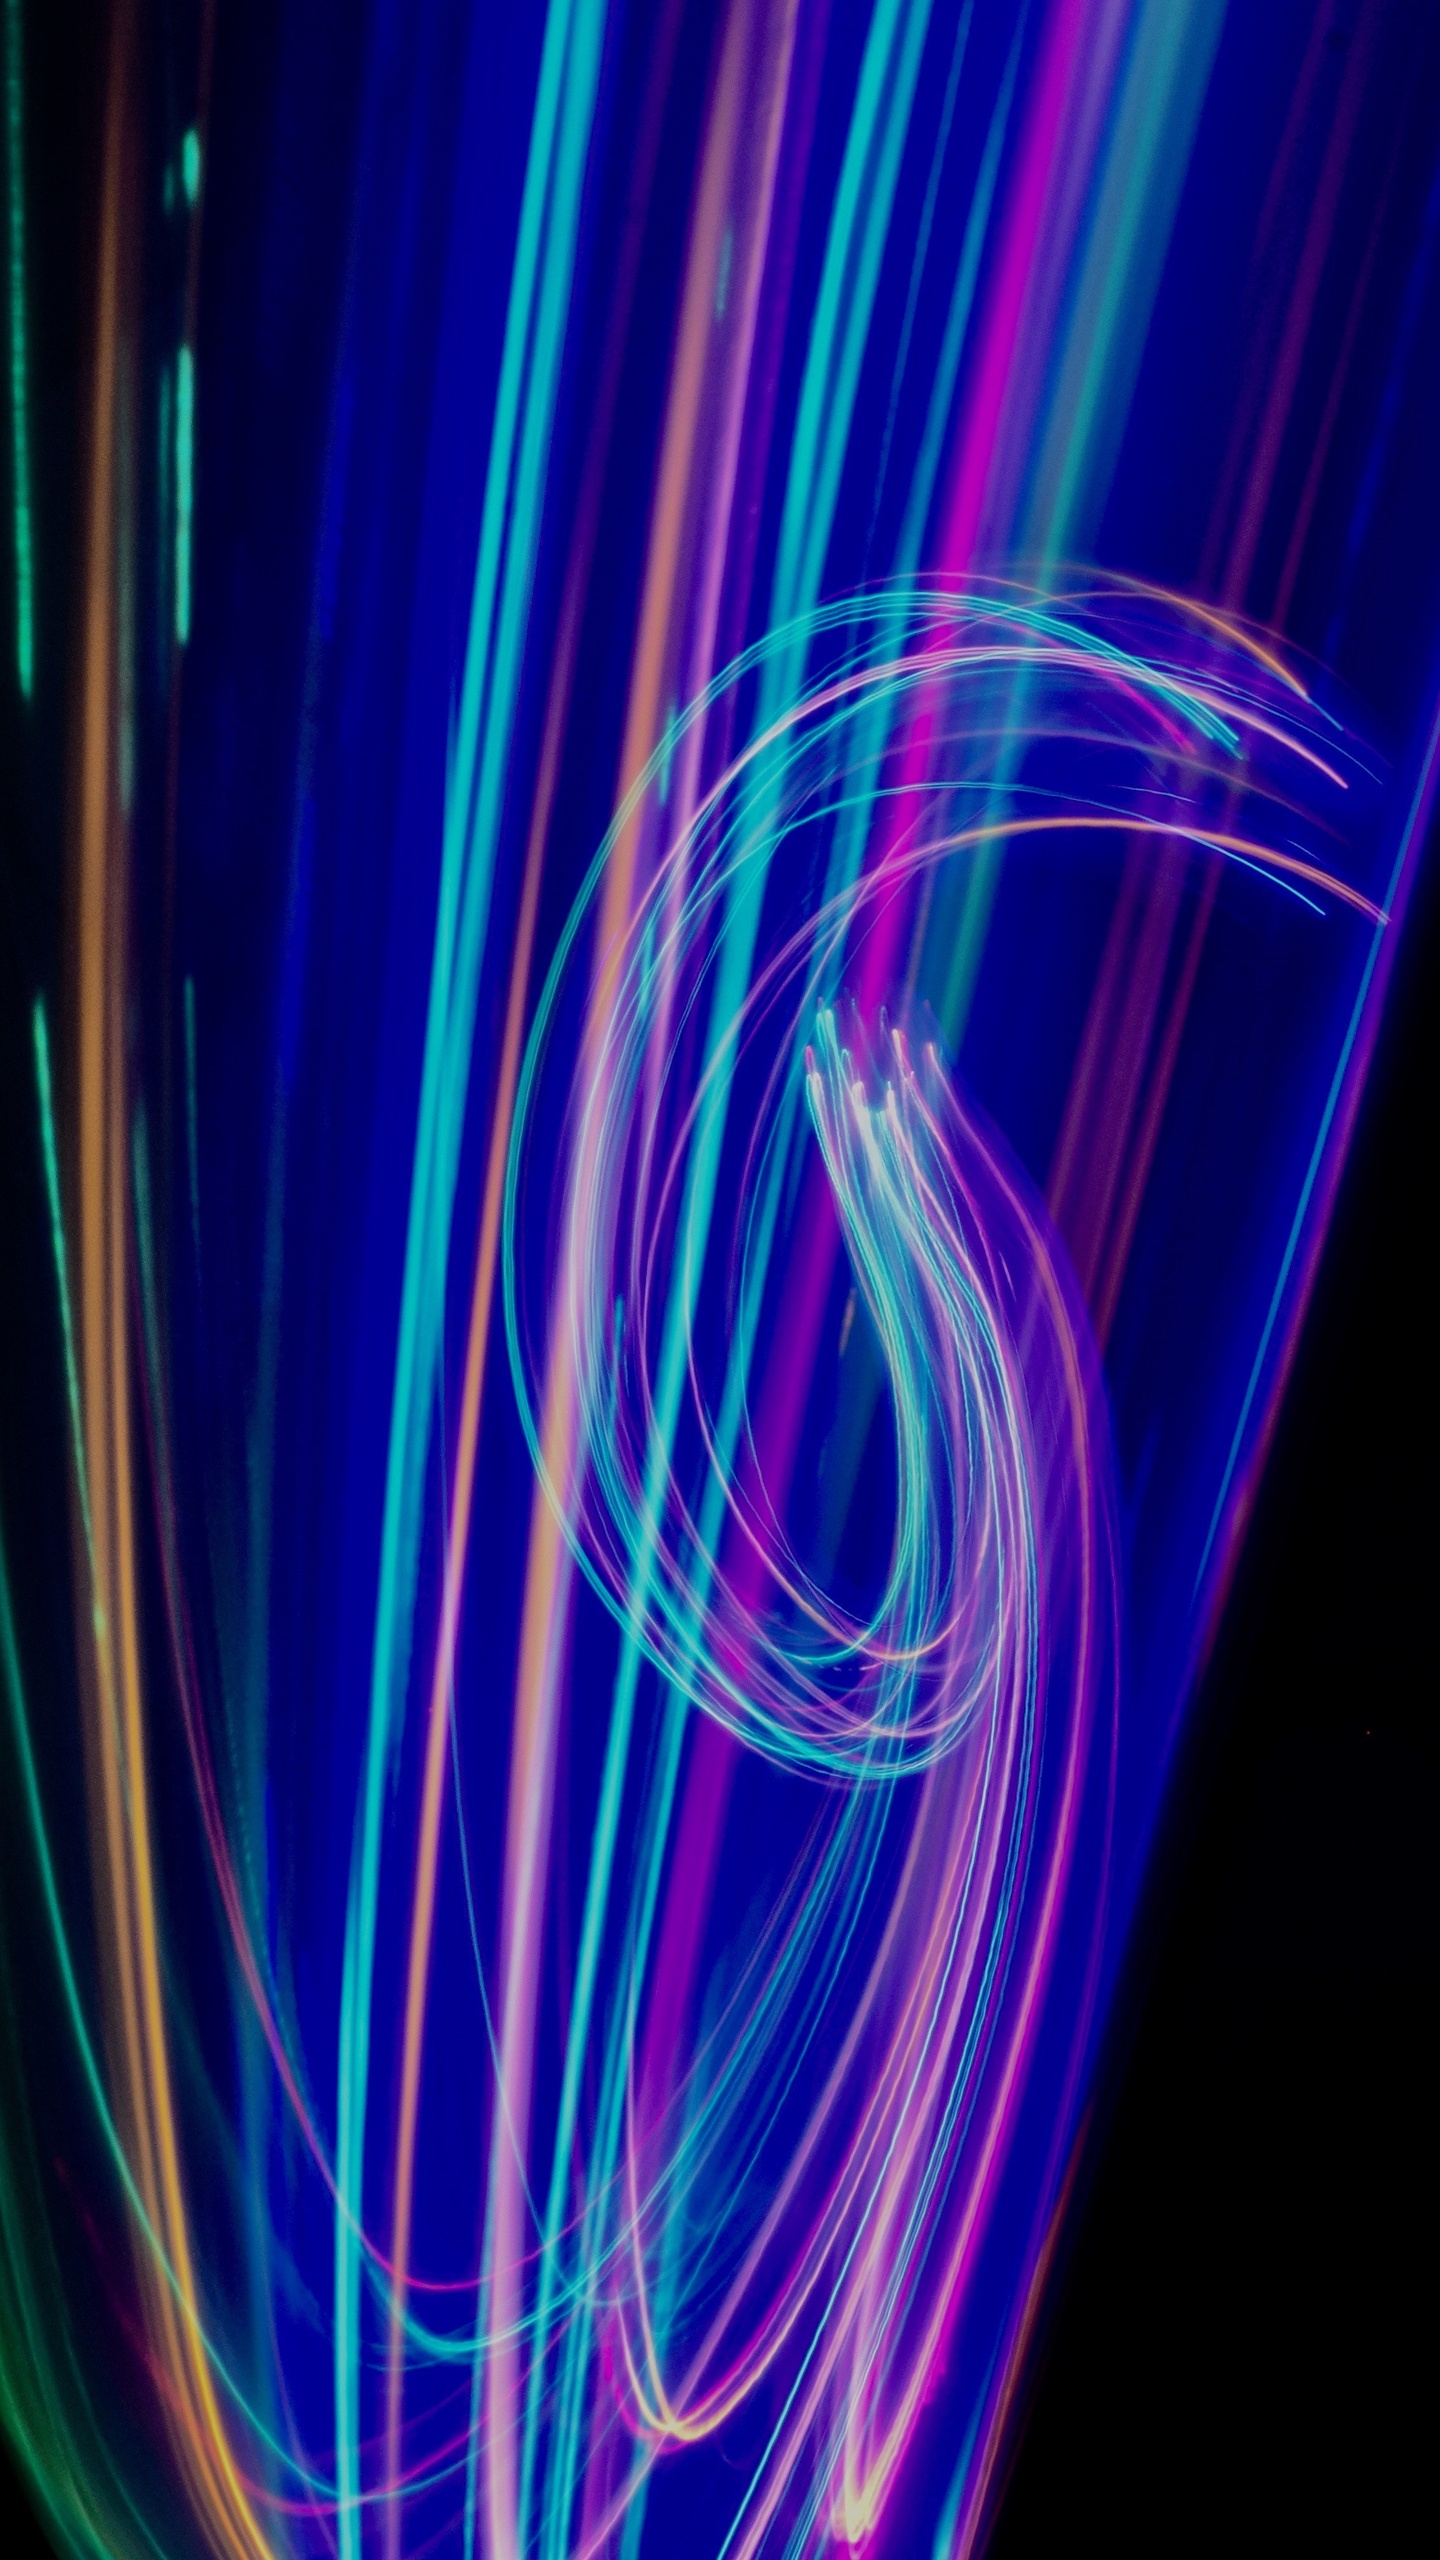 A colorful image of light in the dark - Neon blue